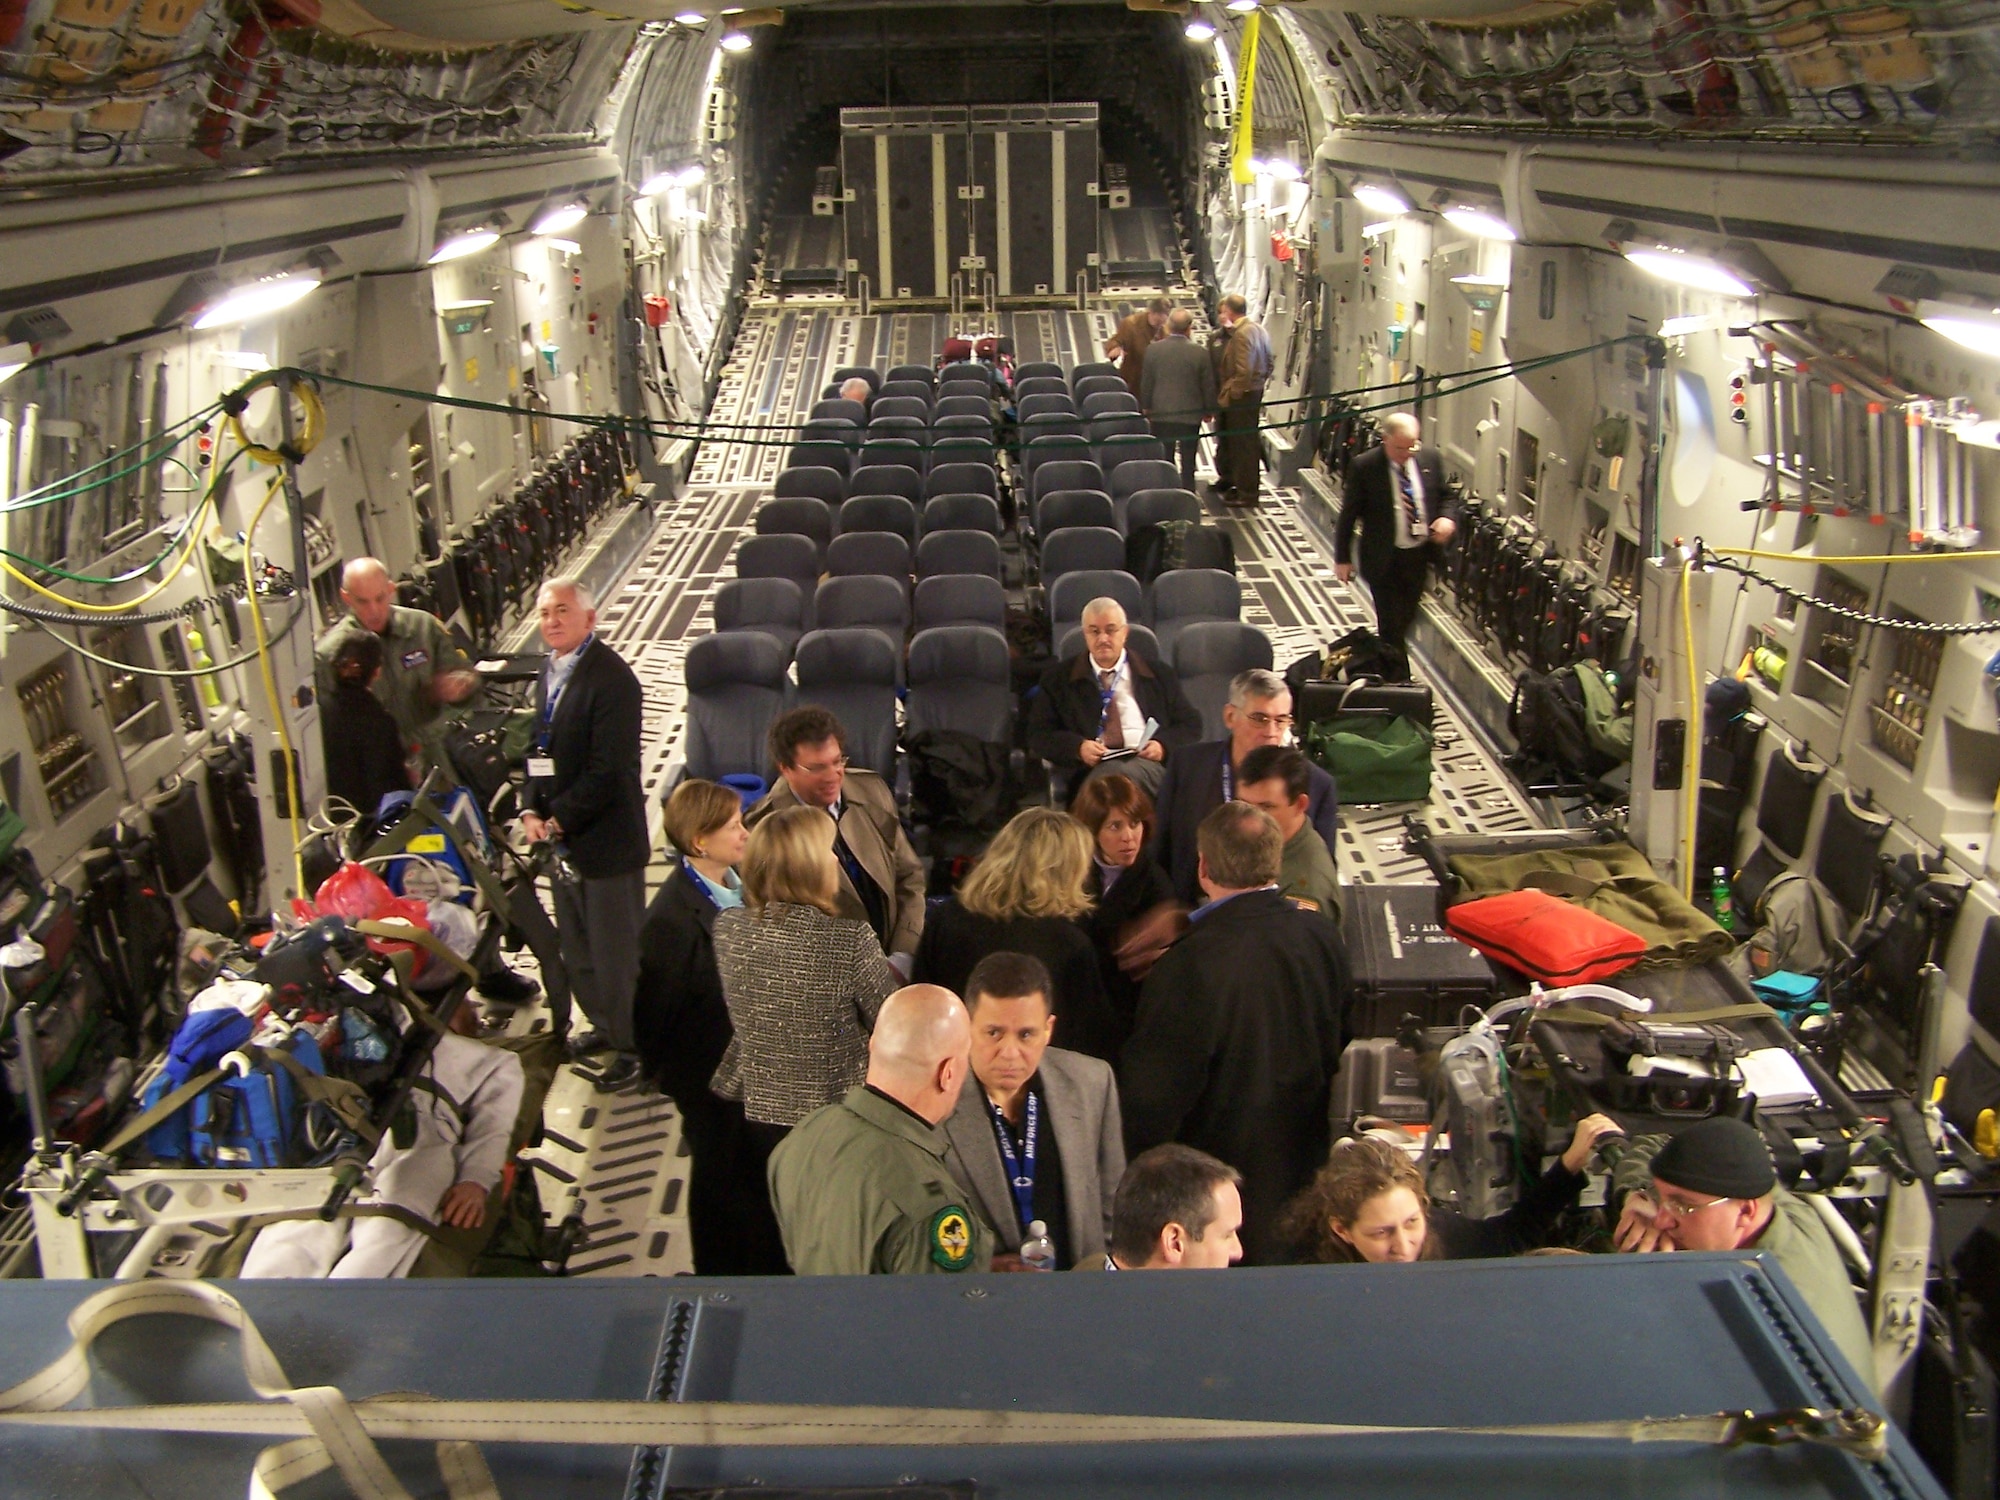 An air evacuation crew from the 183rd Aeromedical Evacuation Squadron in Jackson, Miss., and a Critical Care Air Transport Team from the 81st Medical Group, Keesler Air Force Base, Miss., explain the processes involved in transporting patients aboard a C-17 aeromedical evacuation flight to a group of high-level medical professionals on Jan. 23, part of a National Civic Outreach tour enroute to Wilford Hall Medical Center in San Antonio, Texas.  (U.S. Air Force photo by Master Sgt. Chris
Miller)
  
